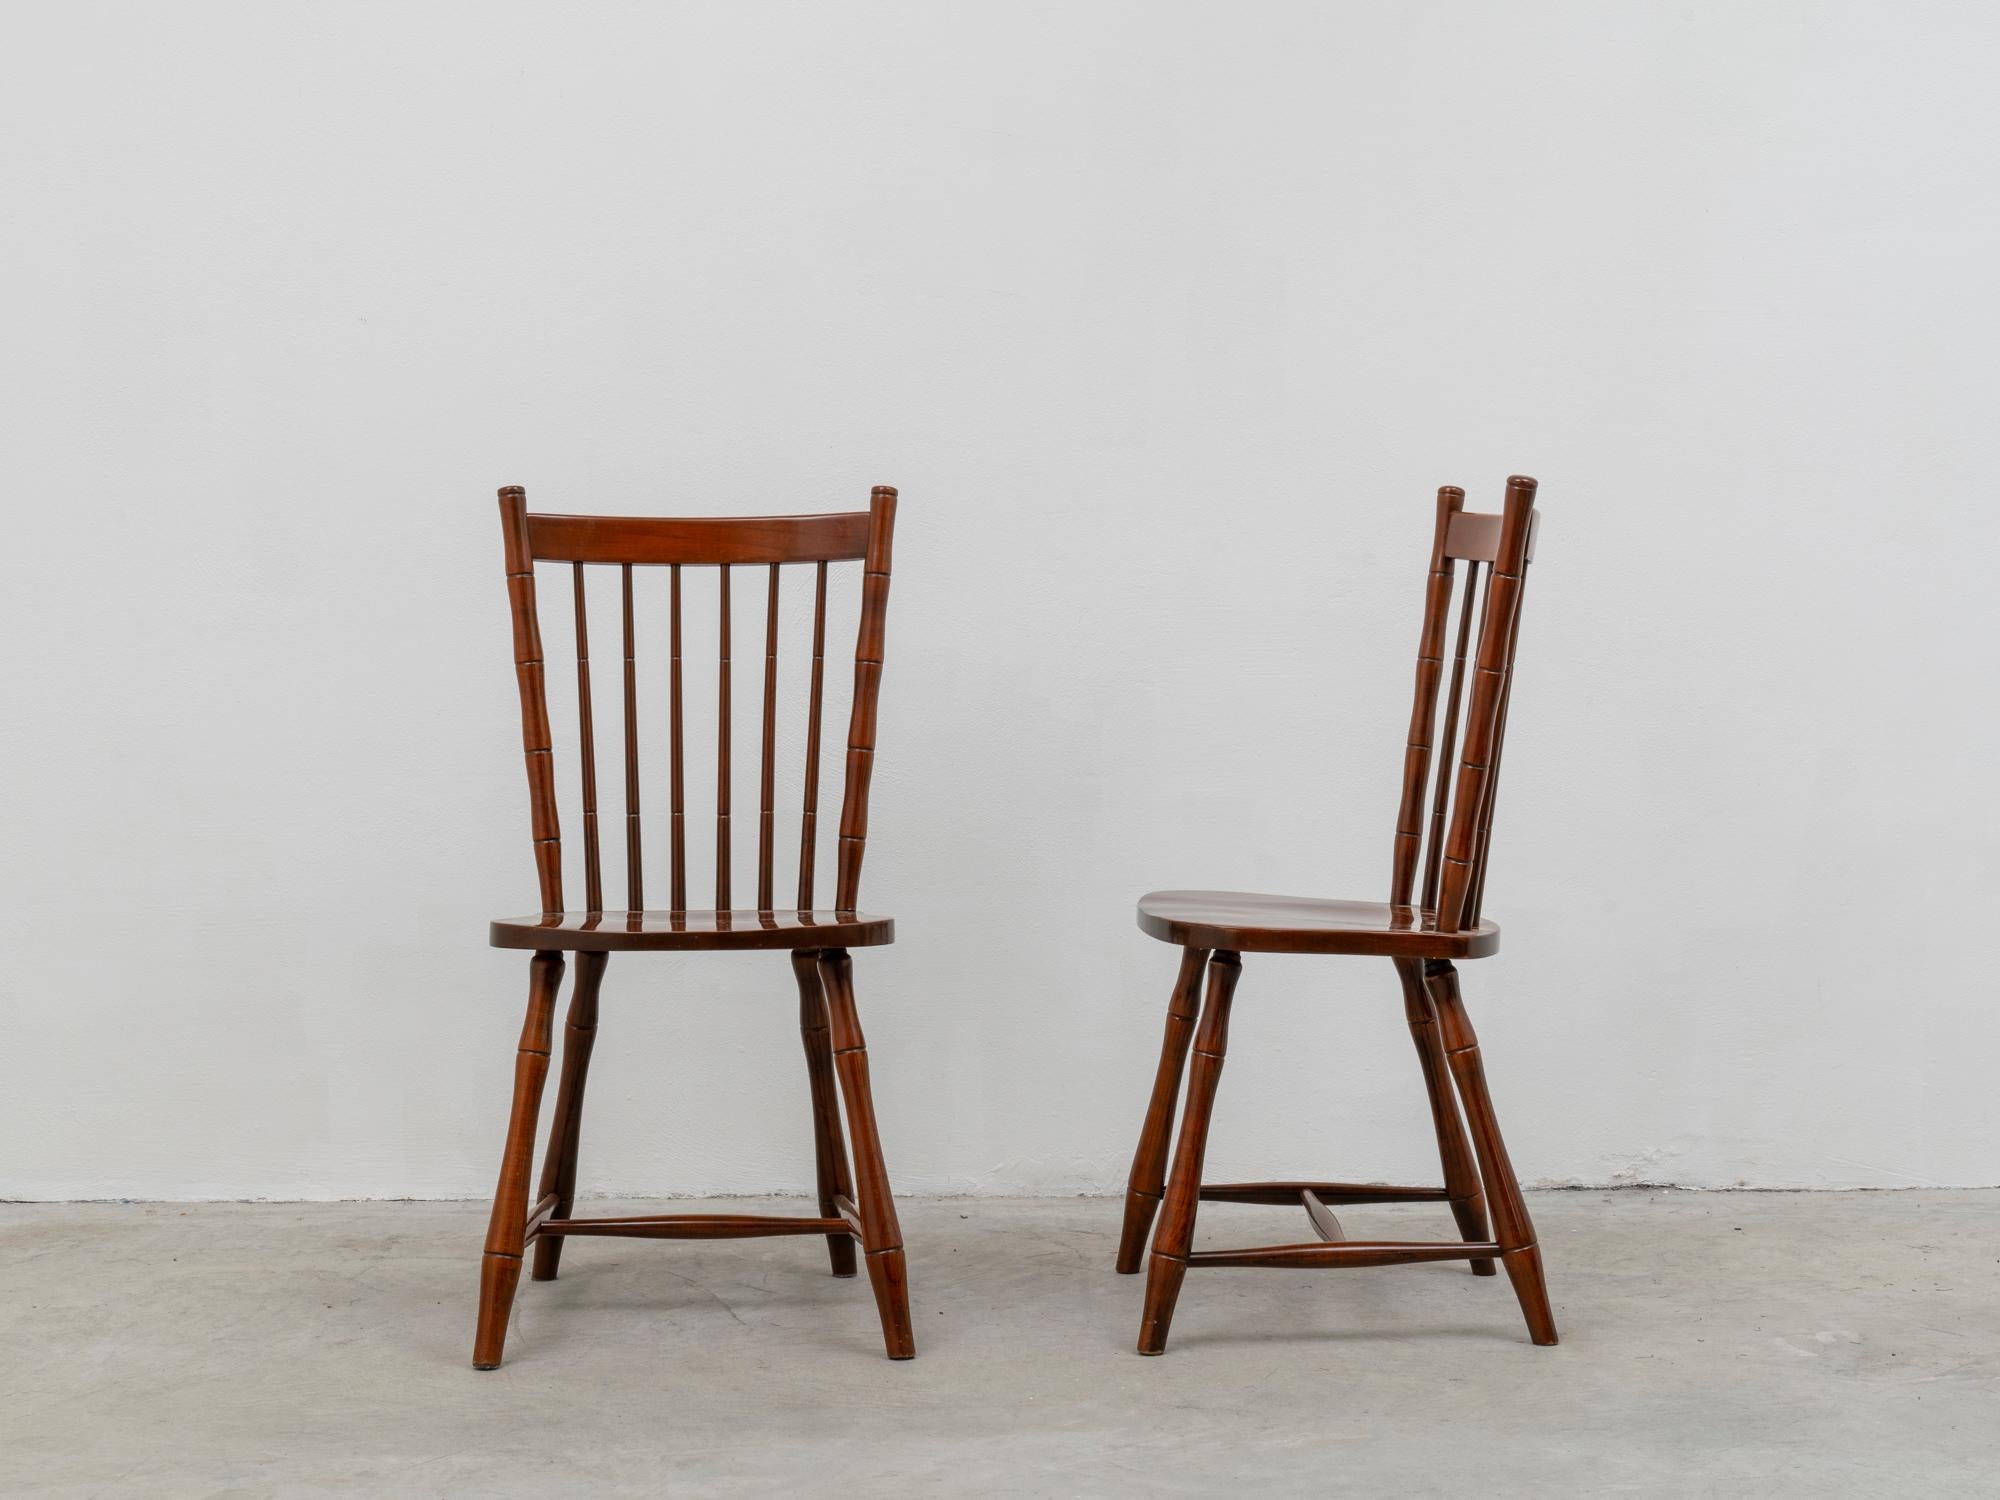 American Classical  Pair of Cherry Wood Chairs by Pennsylvania House edited by Fantoni, 1970s For Sale